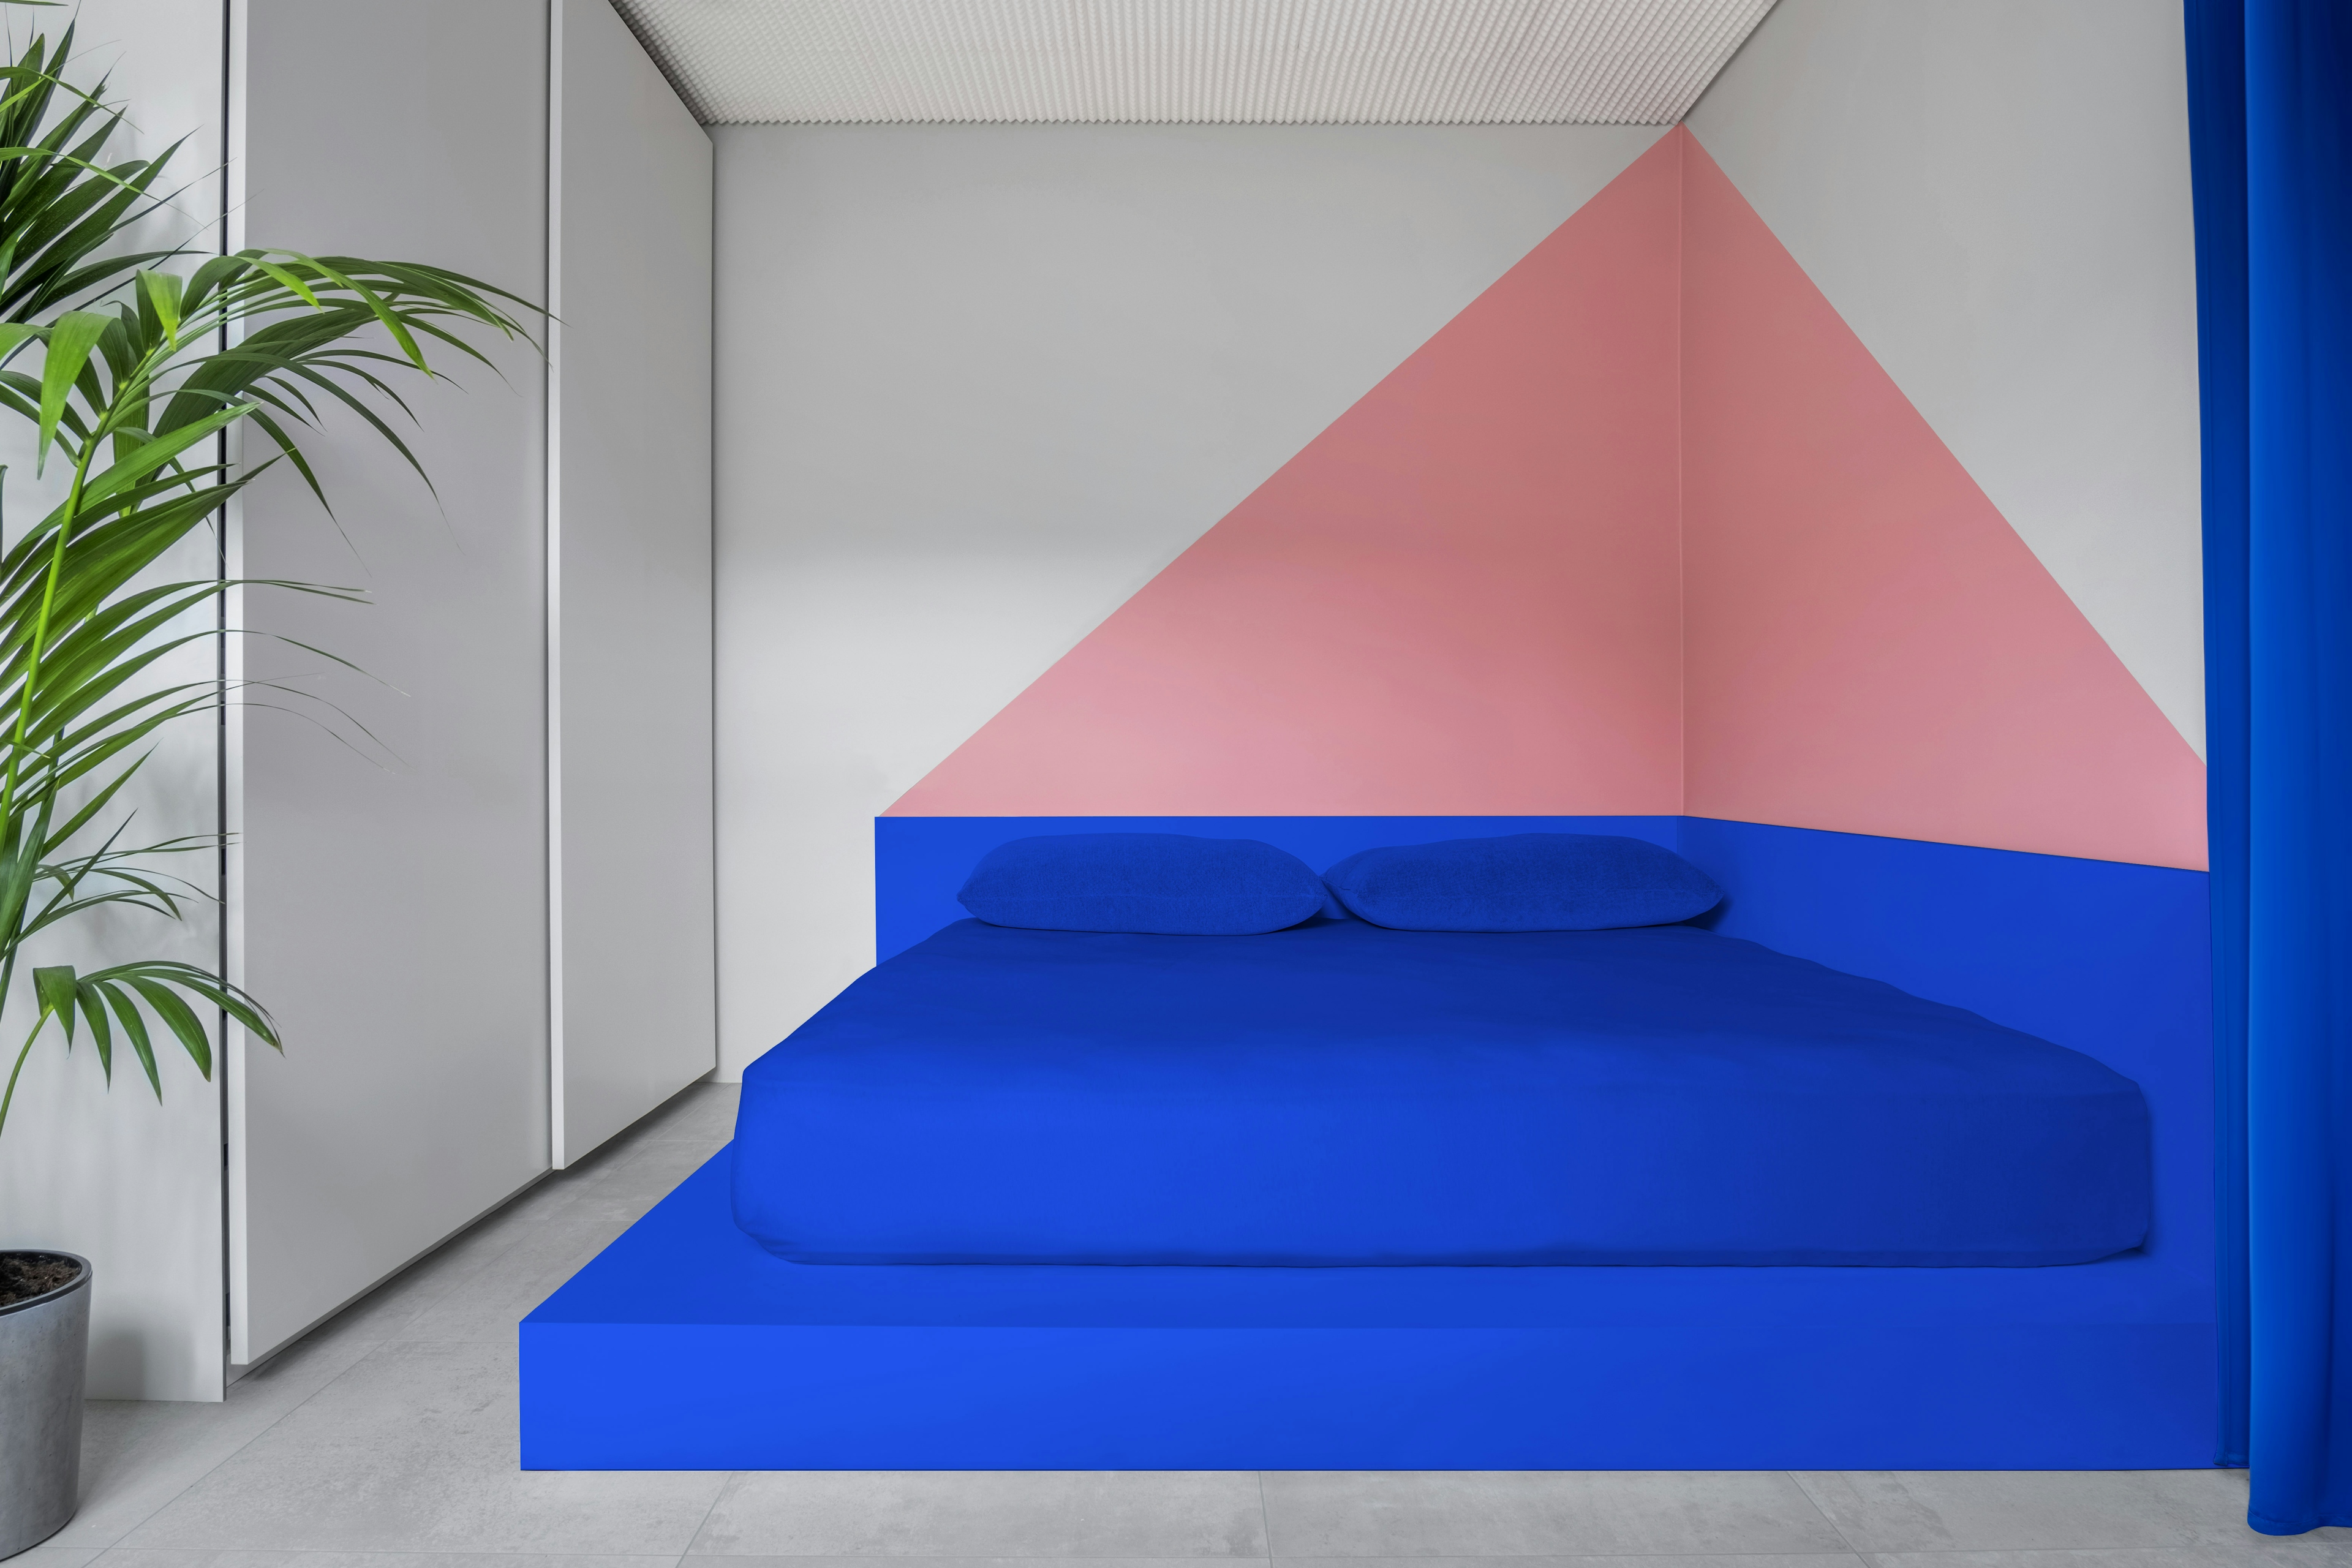 Gummi's apartment - A minimal-pop apartment enlivened by exotic touches and accents of colour